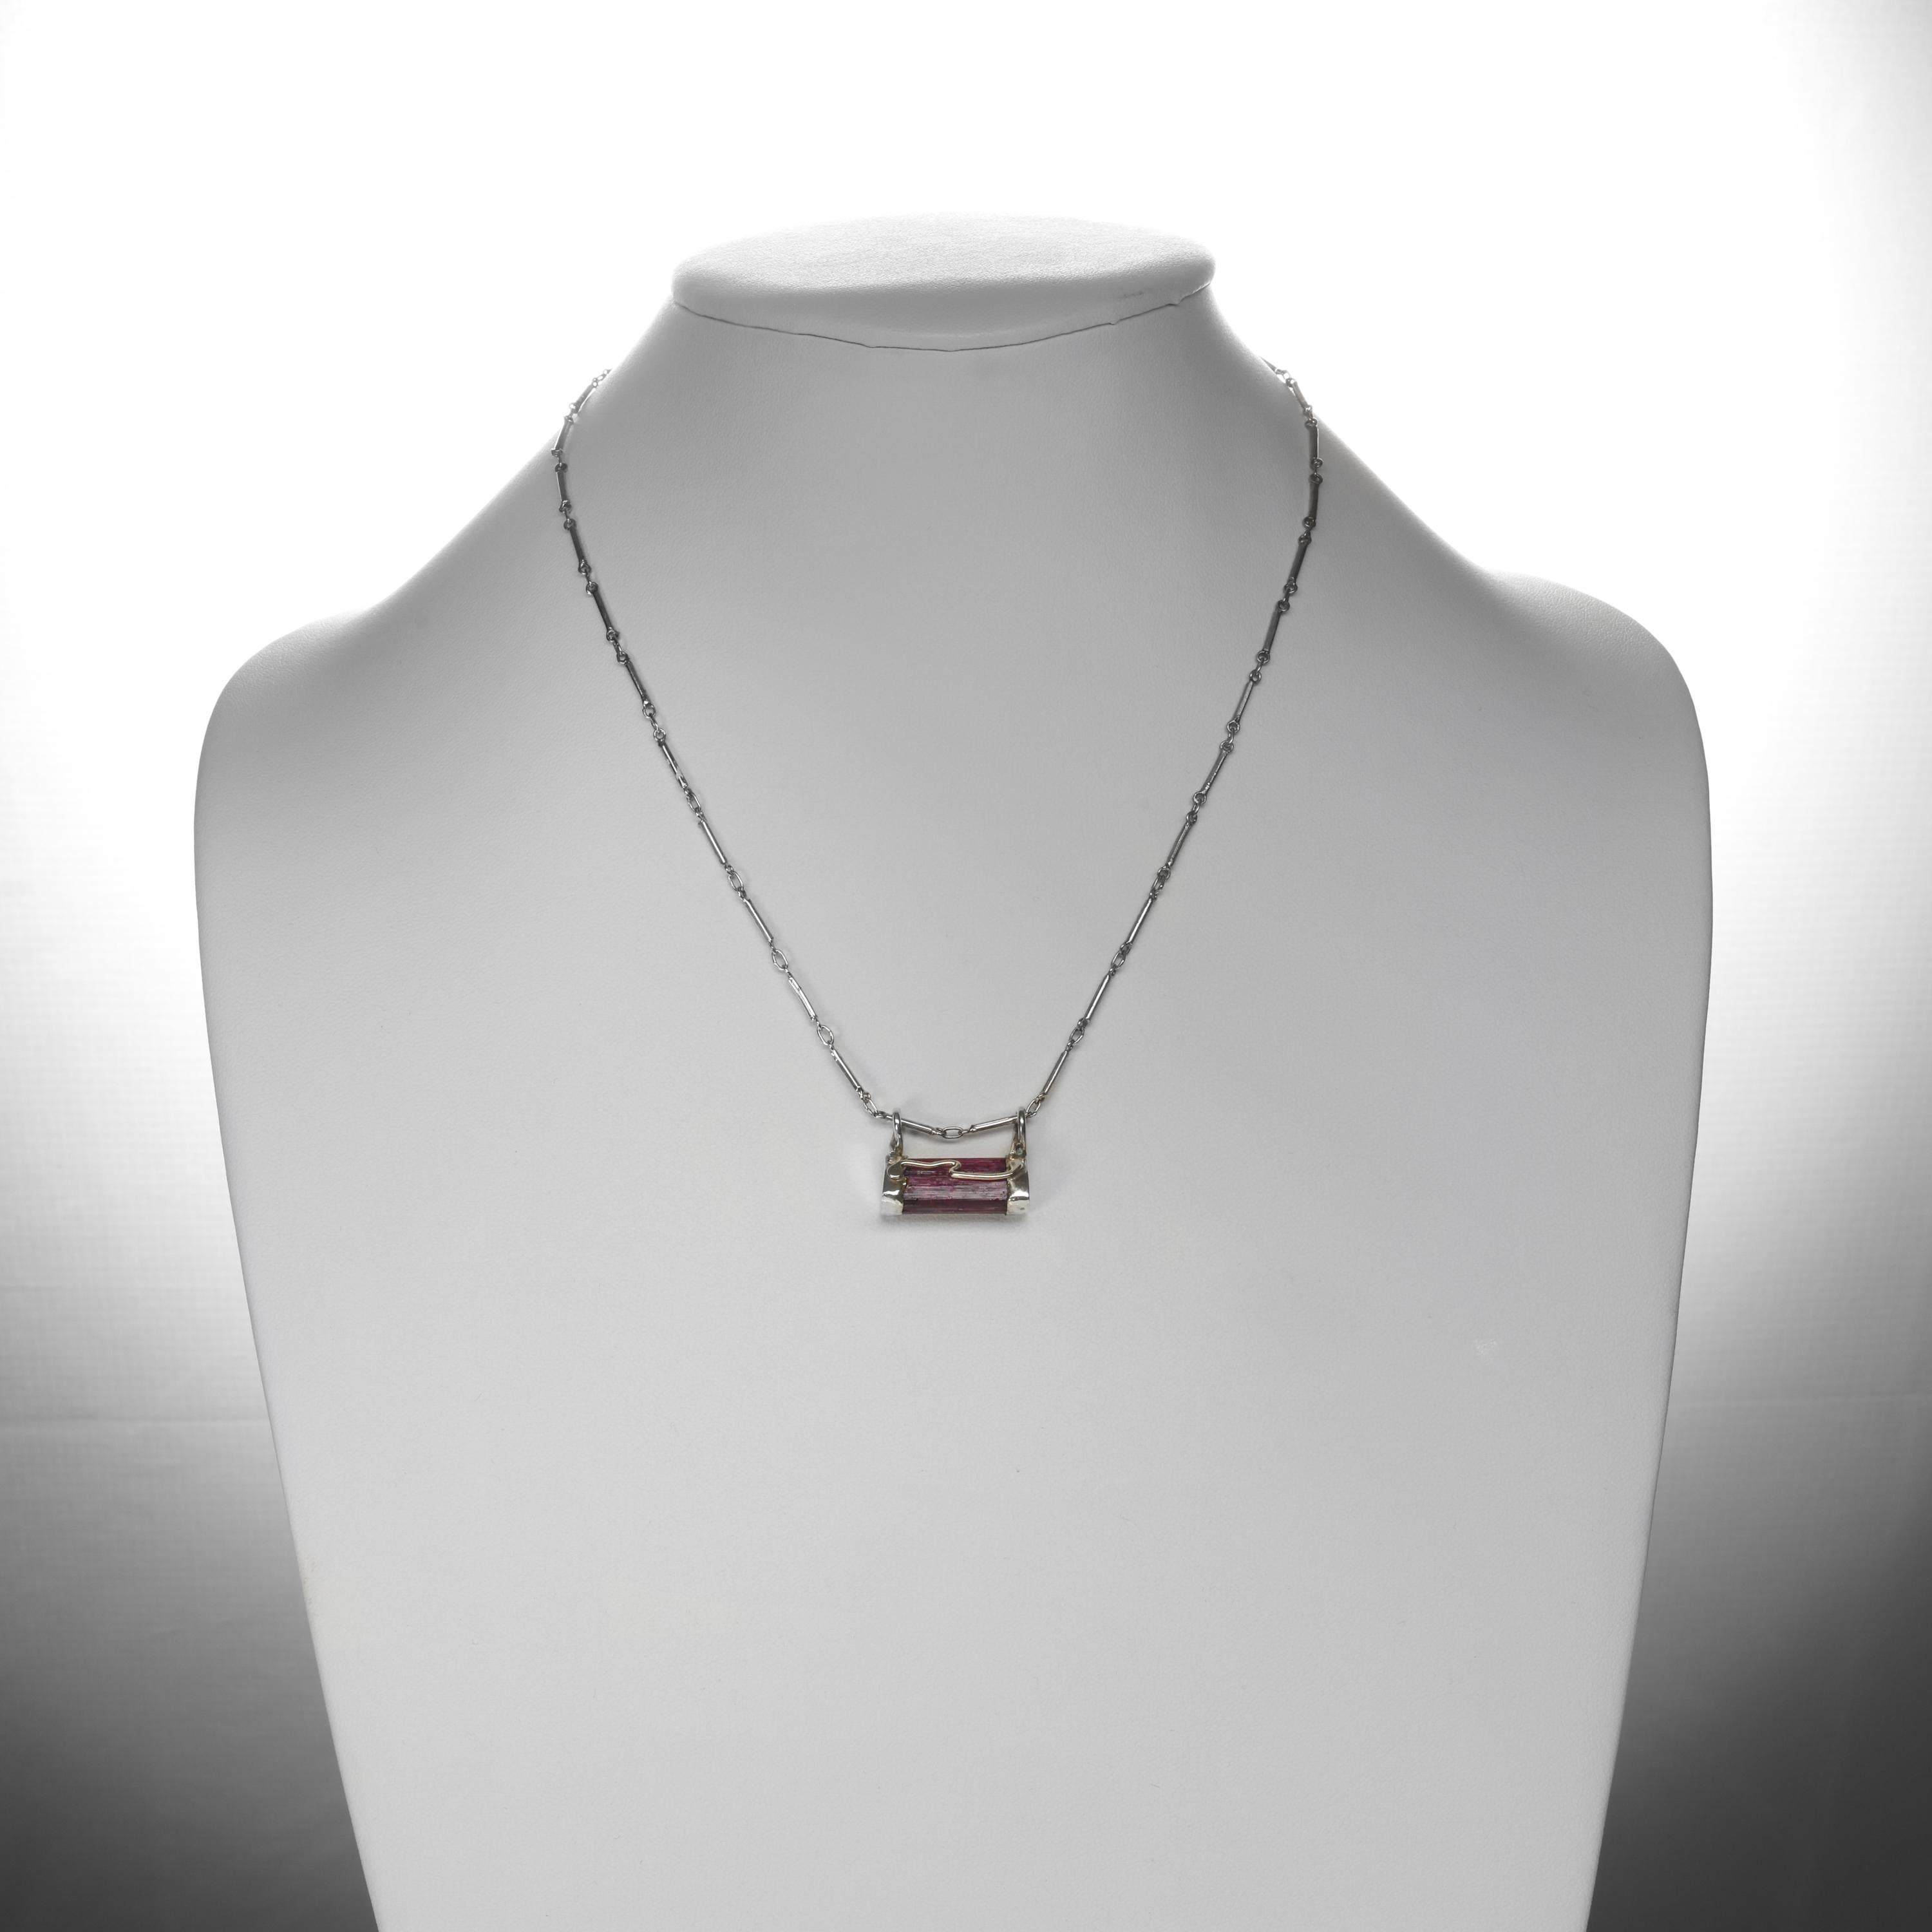 Tourmaline Crystal Pendant Midcentury In Excellent Condition For Sale In Southbury, CT